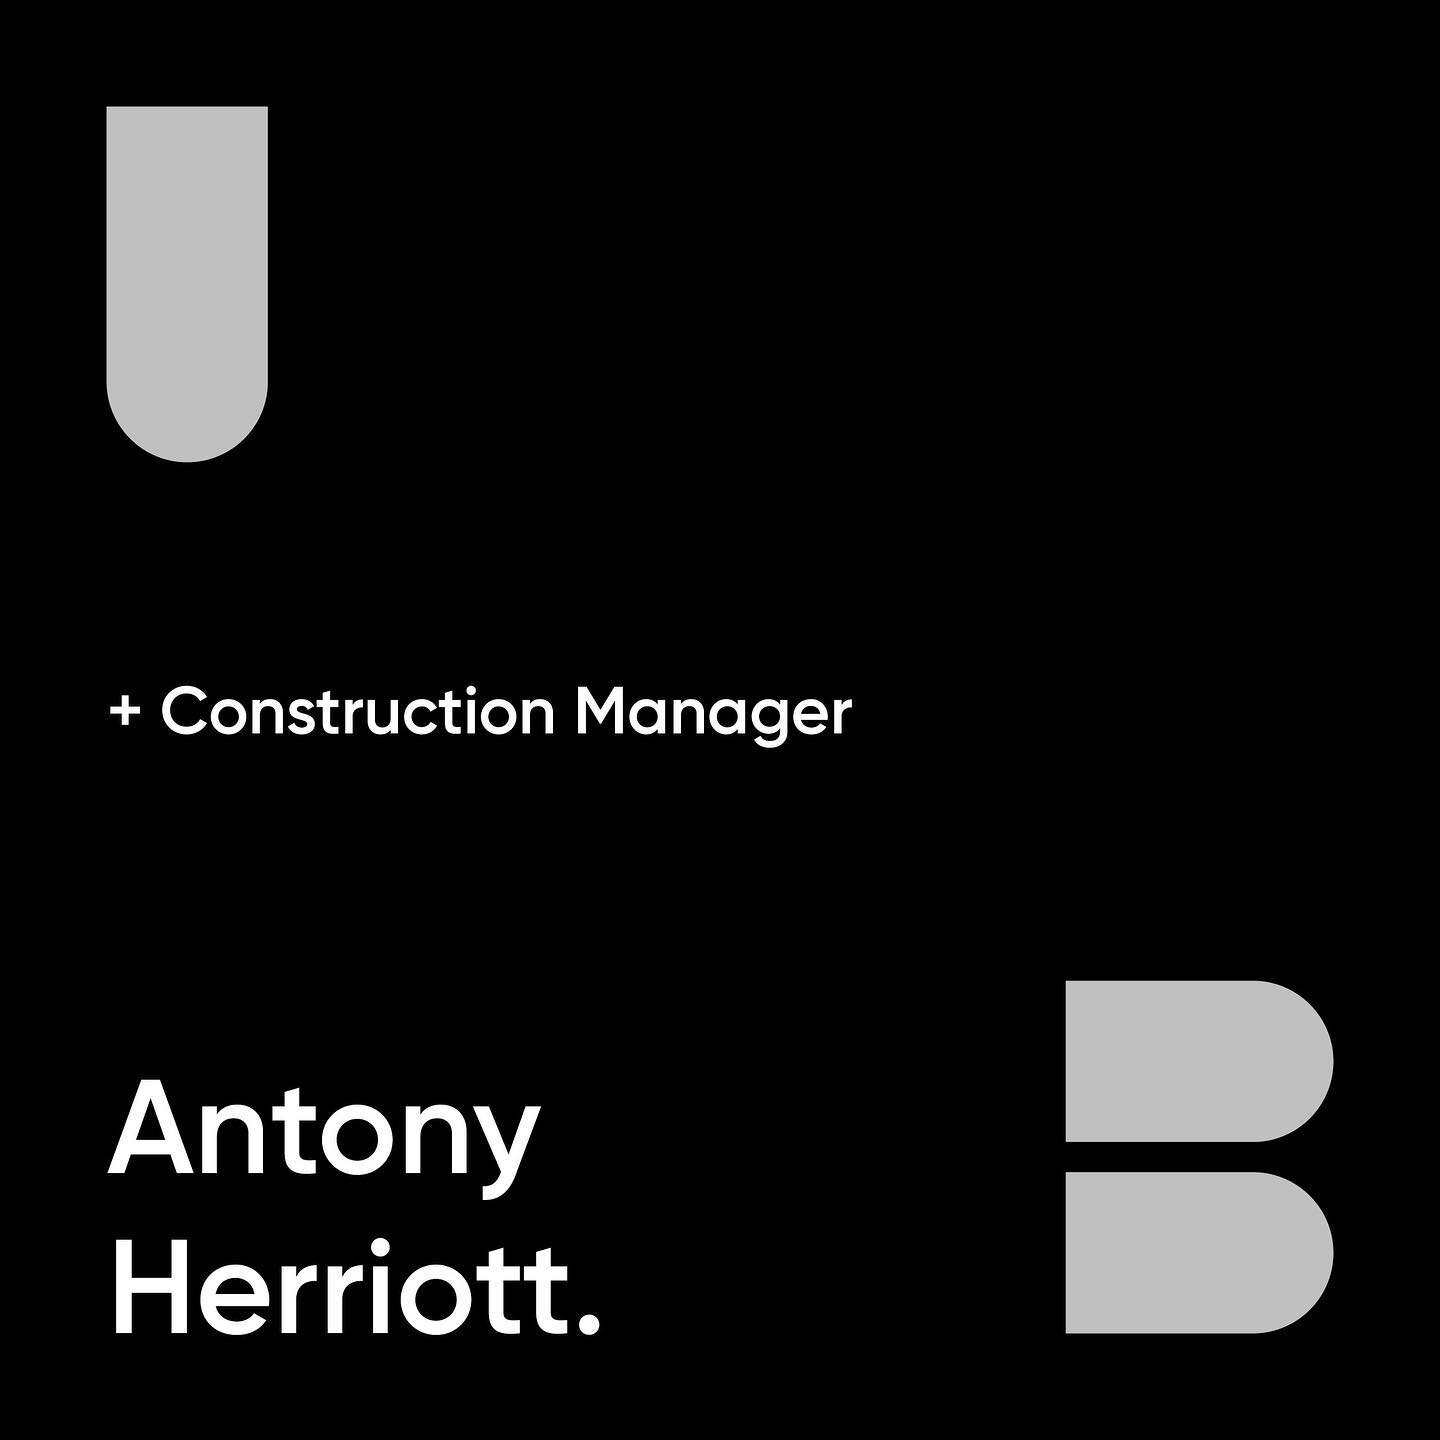 Meet Unison Built&rsquo;s leading Construction Manager, Antony Herriott.
Antony has been in the construction industry for over 40 years and is a widely trusted professional with a history of demonstrated success.

Antony has worked with multiple lead